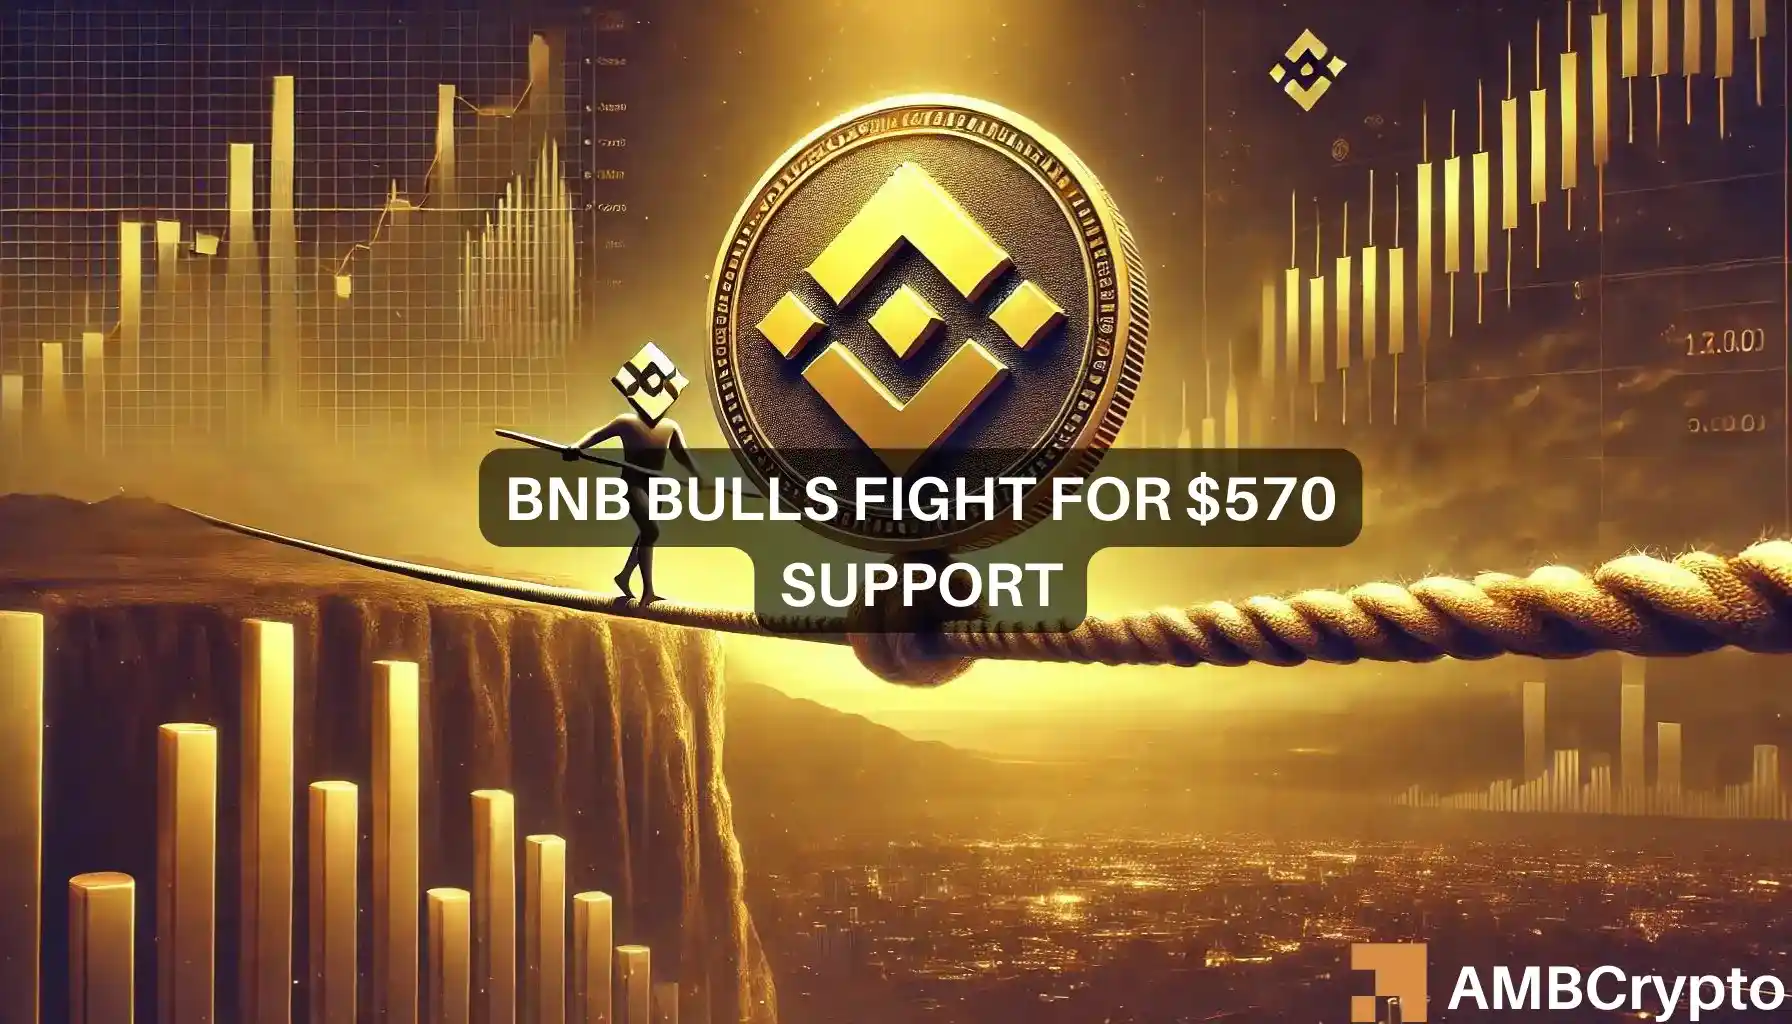 BNB price prediction shows rise to $600, but will the altcoin turn bearish after?